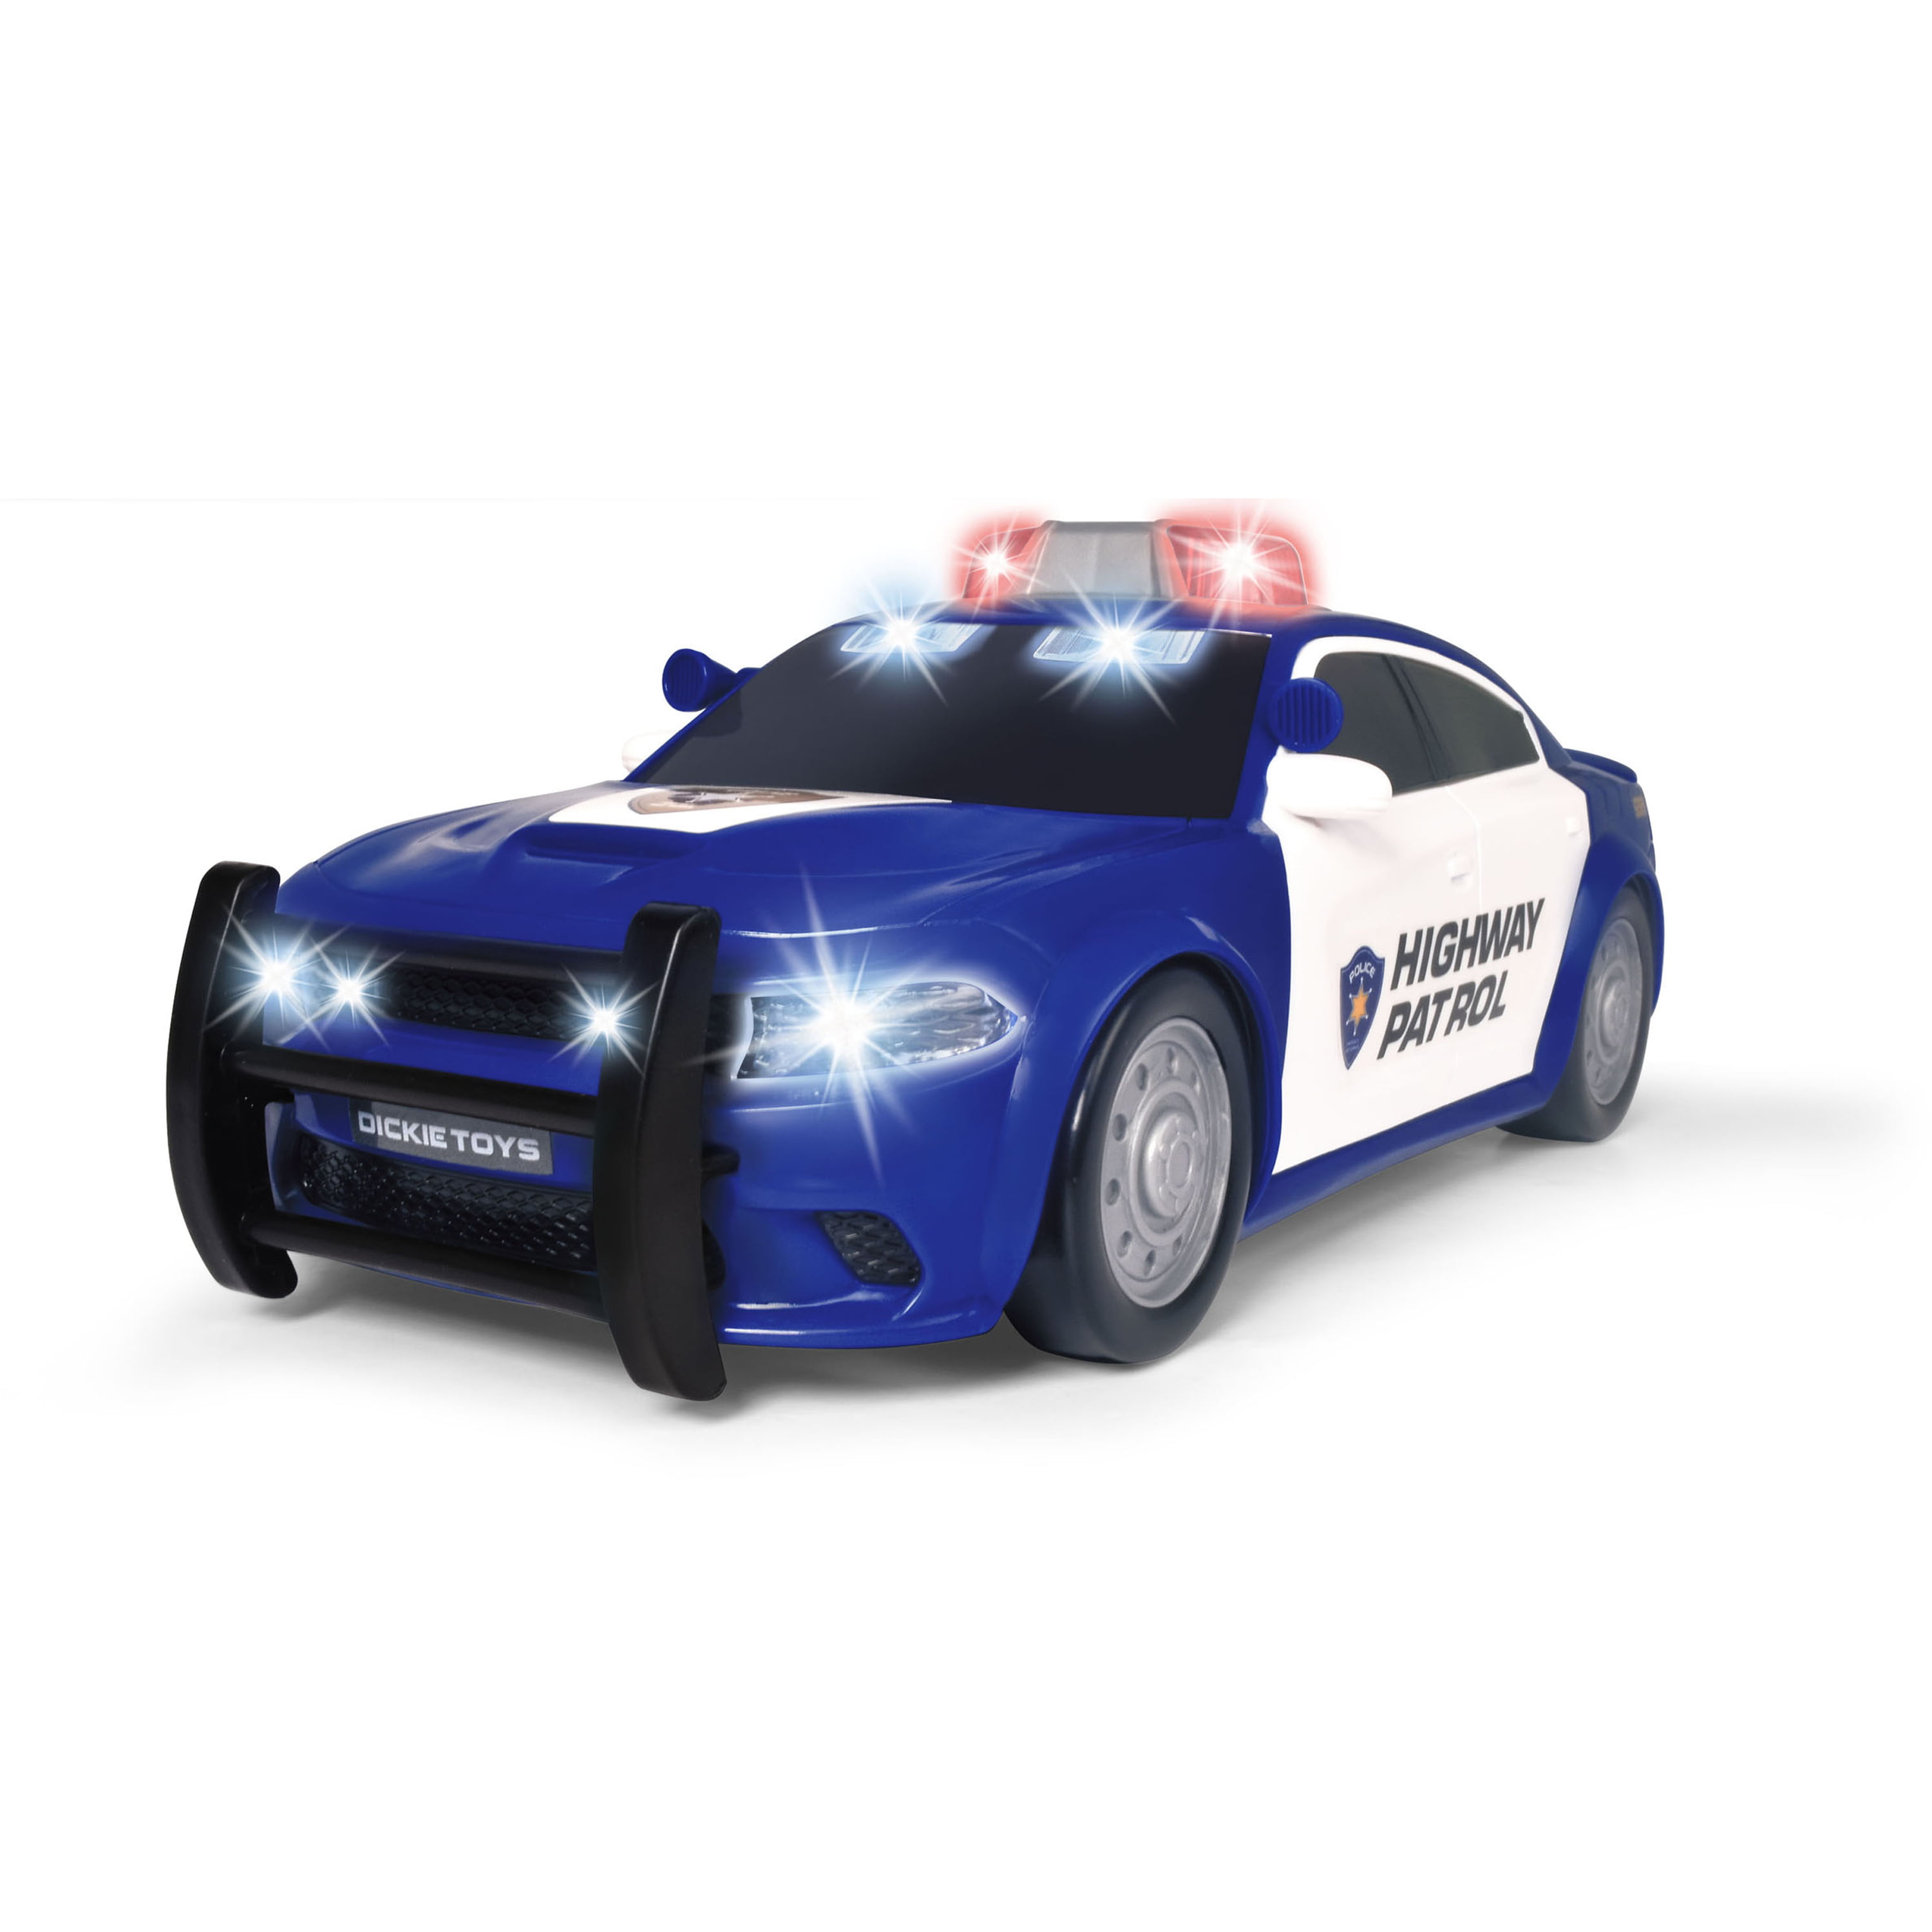 Sound Dodge Patrol Toys with Charge Lights Highway Police Dickie and Vehicle, Play